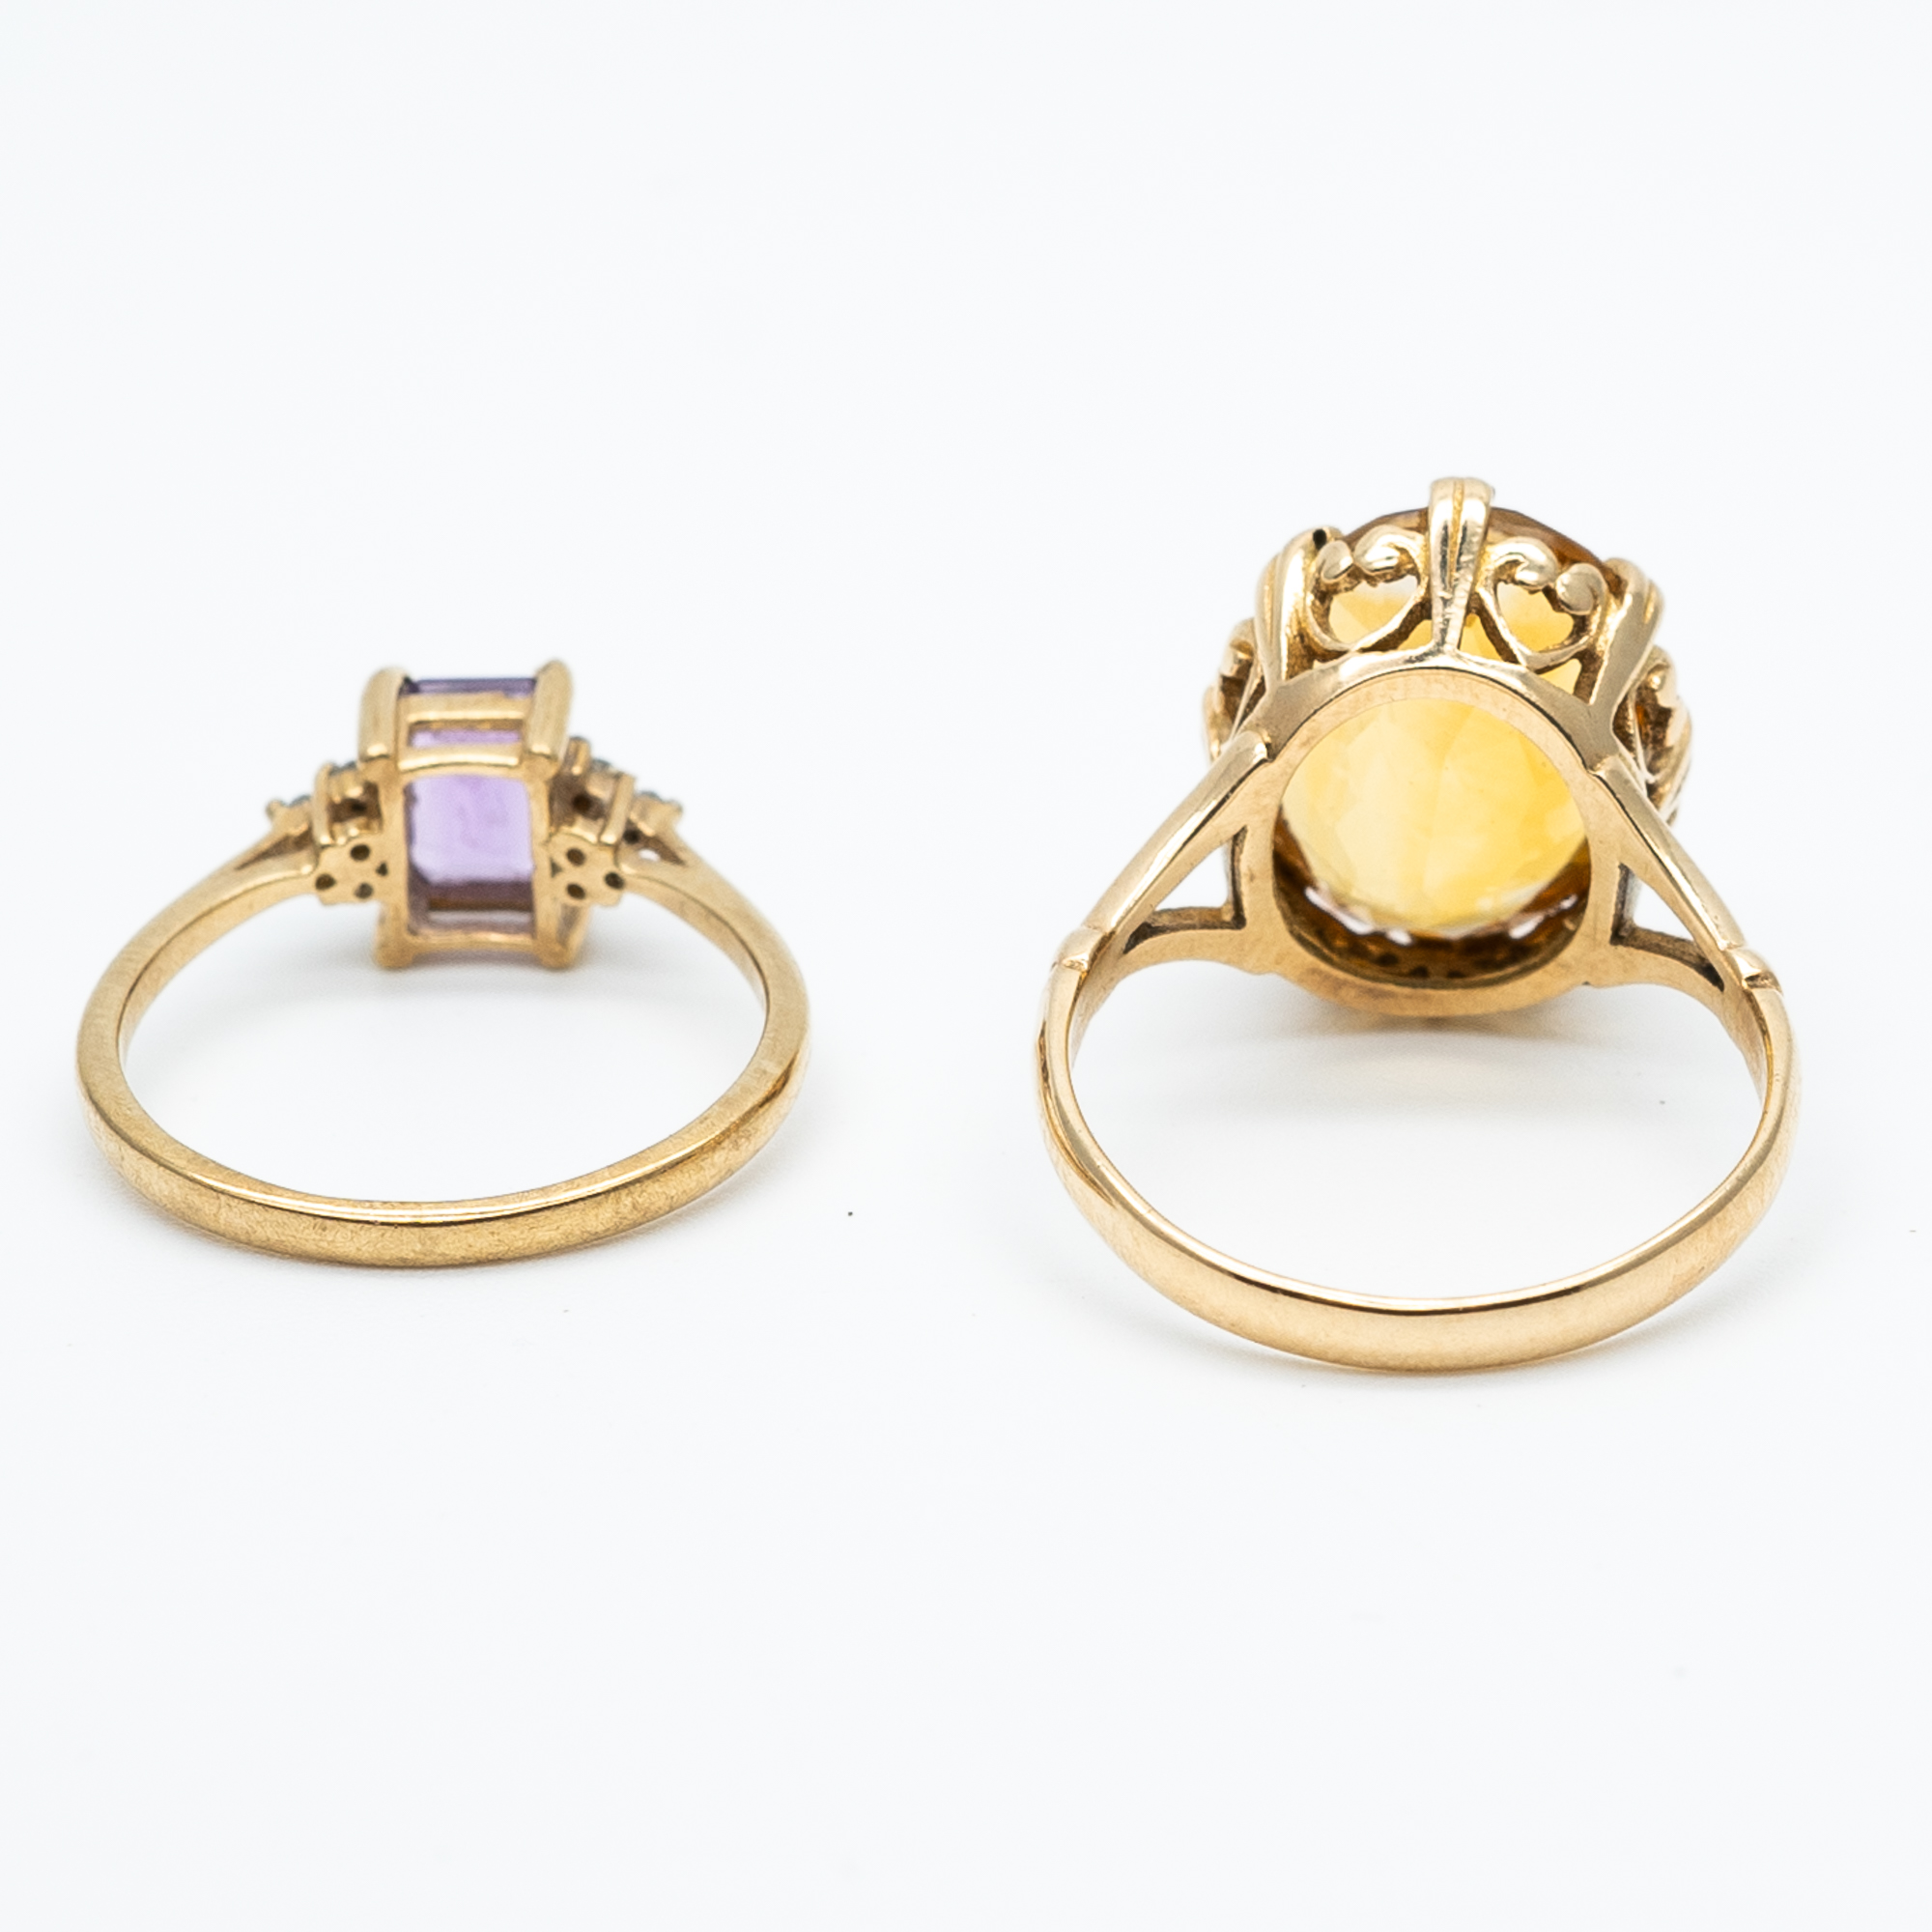 2x 9ct yellow gold dress rings - Image 2 of 4